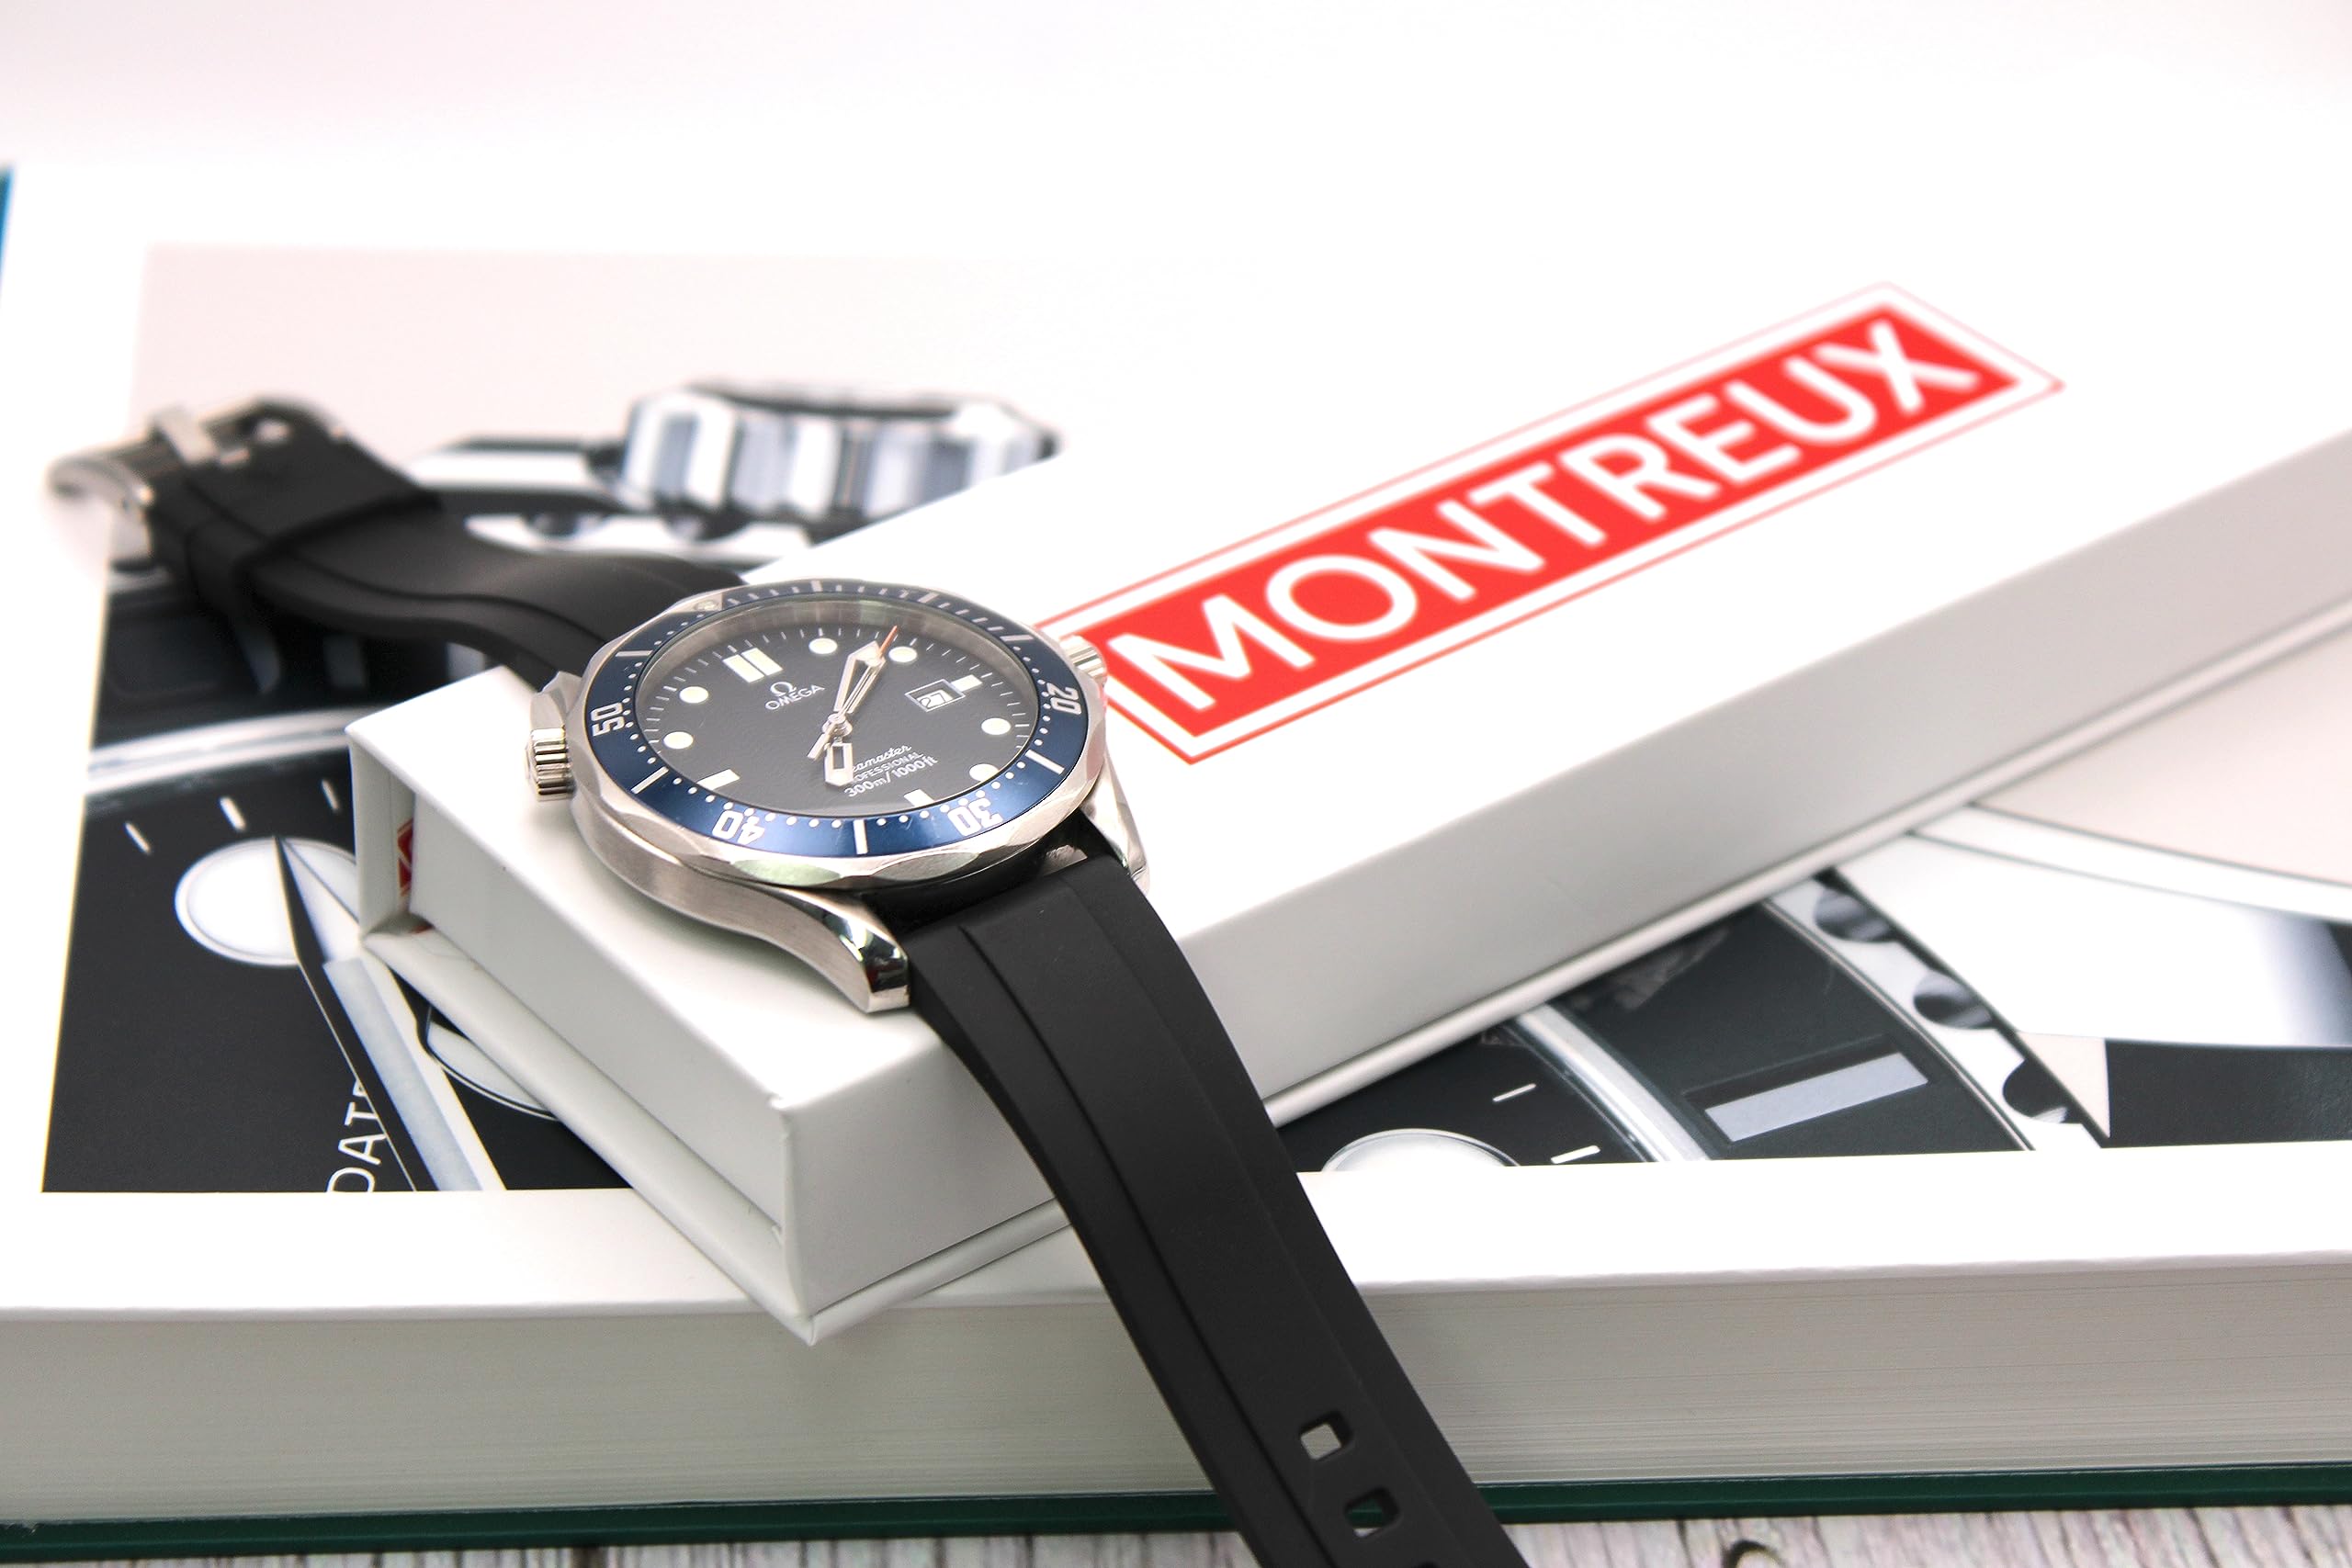 MONTREUX Premium Quick Release FKM Rubber Watch Strap Band for Rolex, Omega, TAG Heuer, Seiko & More